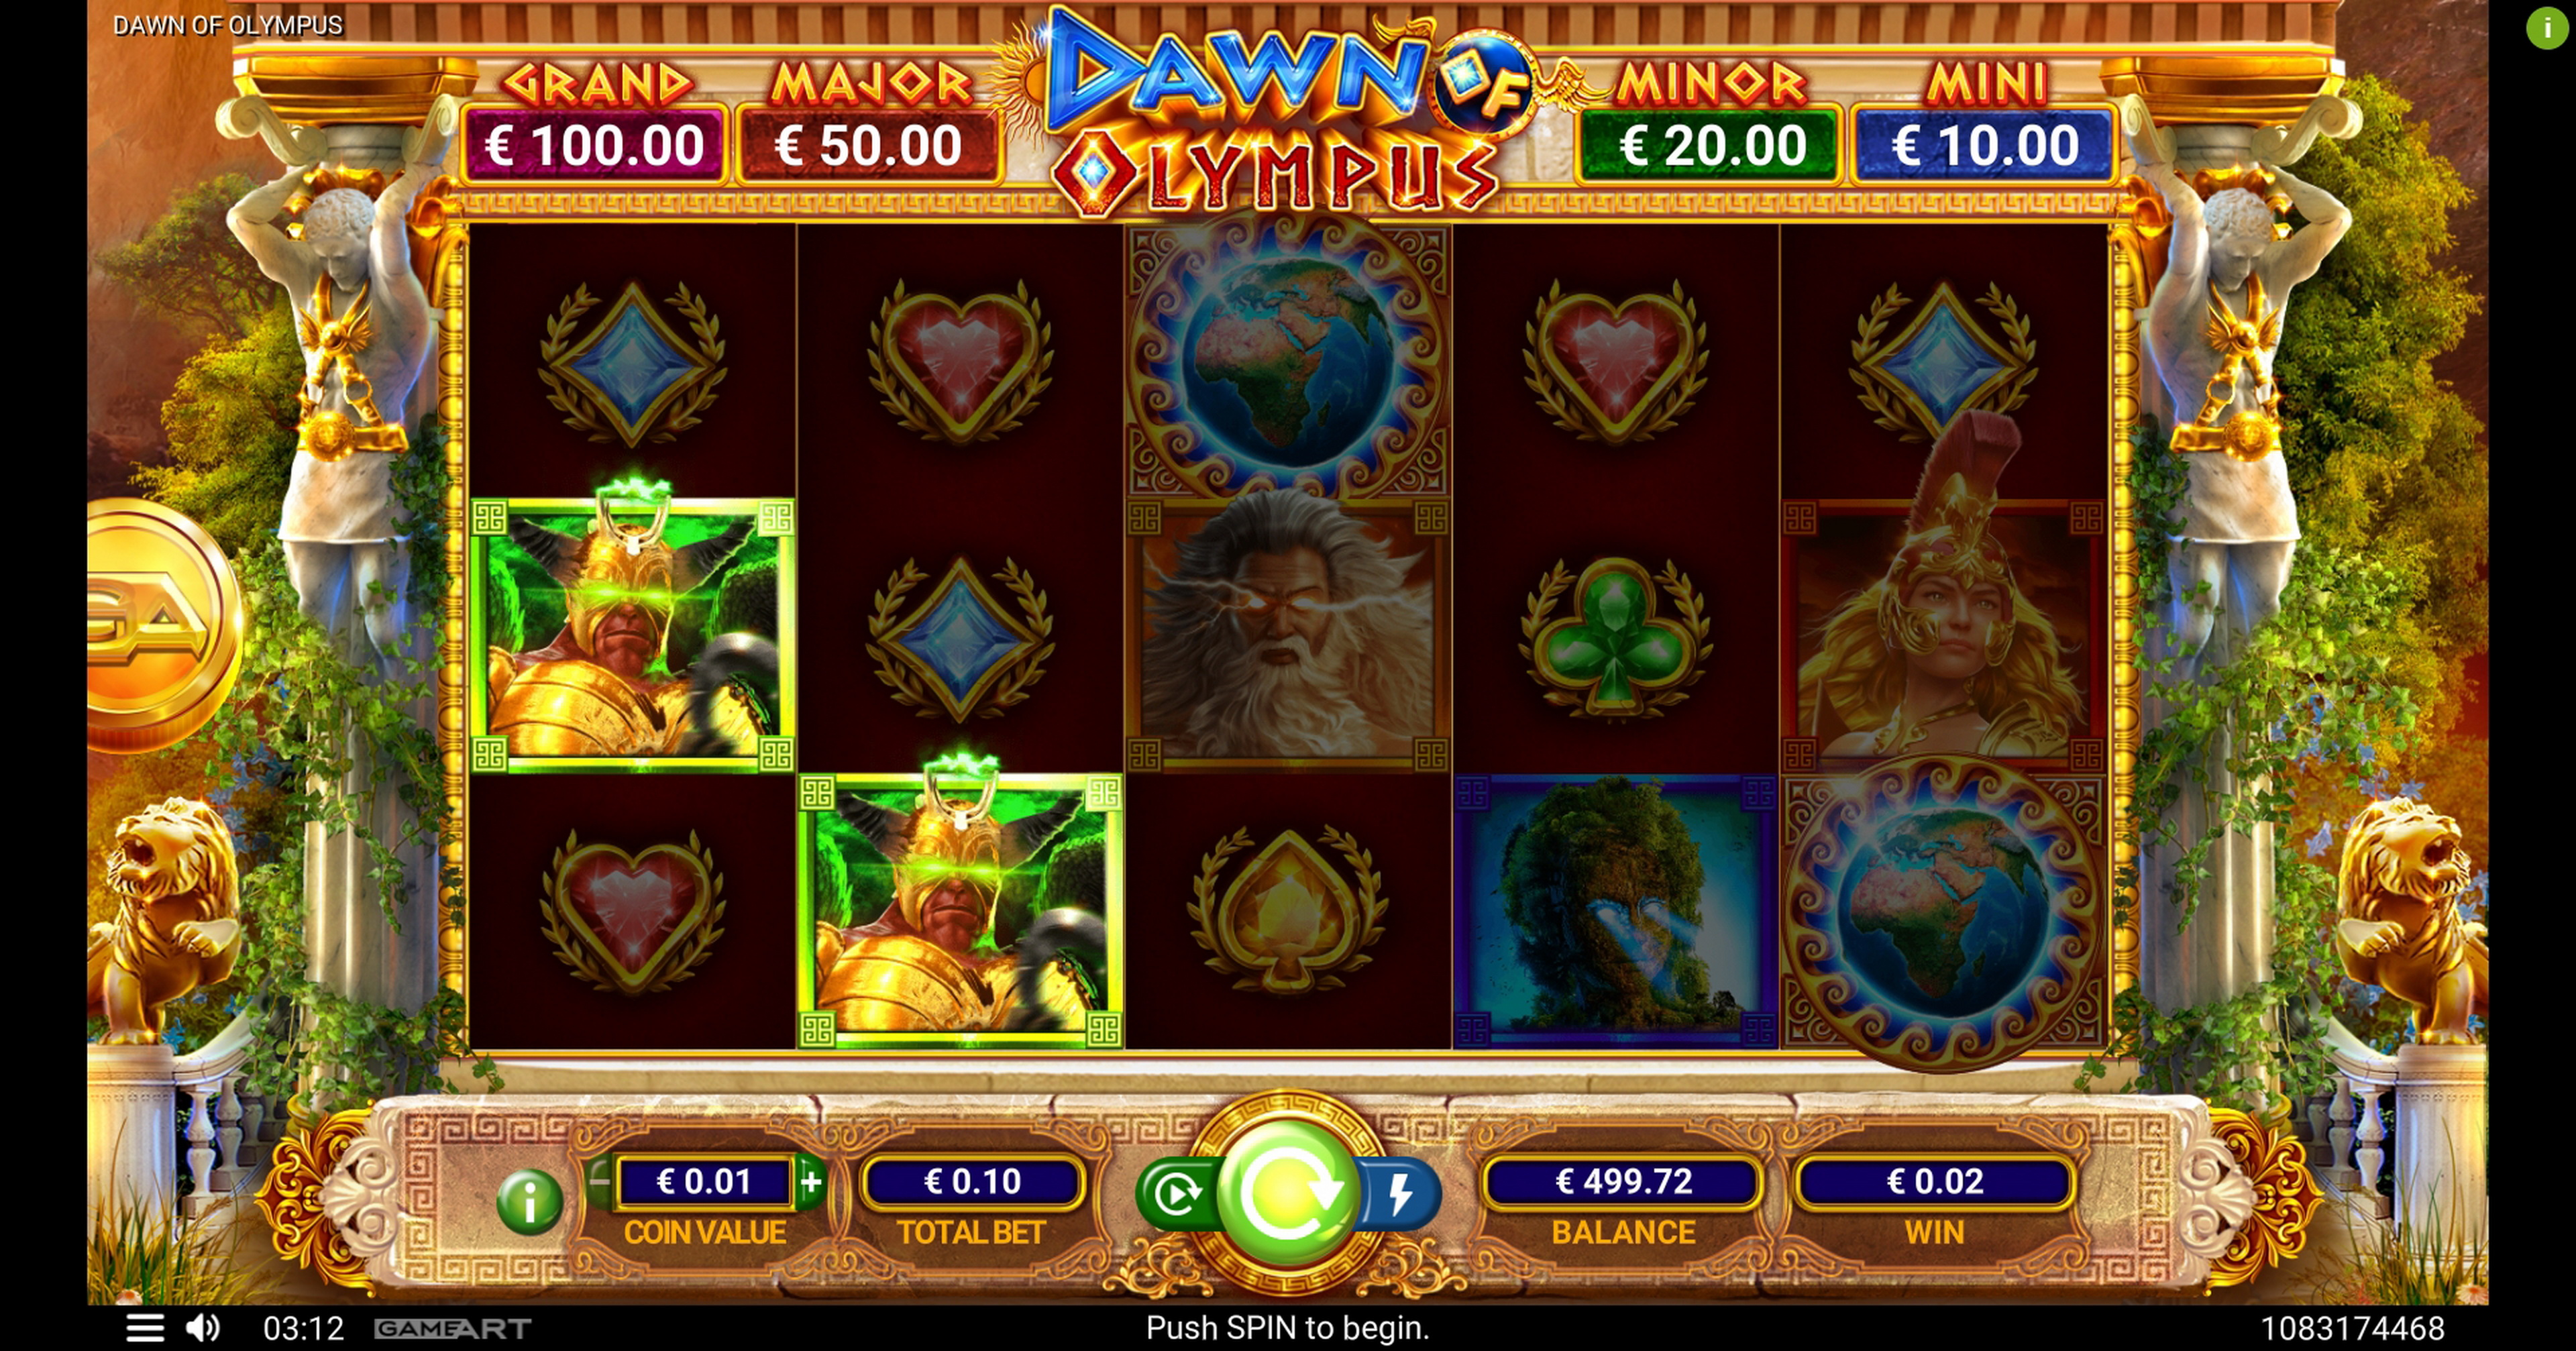 Win Money in Dawn of Olympus Free Slot Game by GameArt